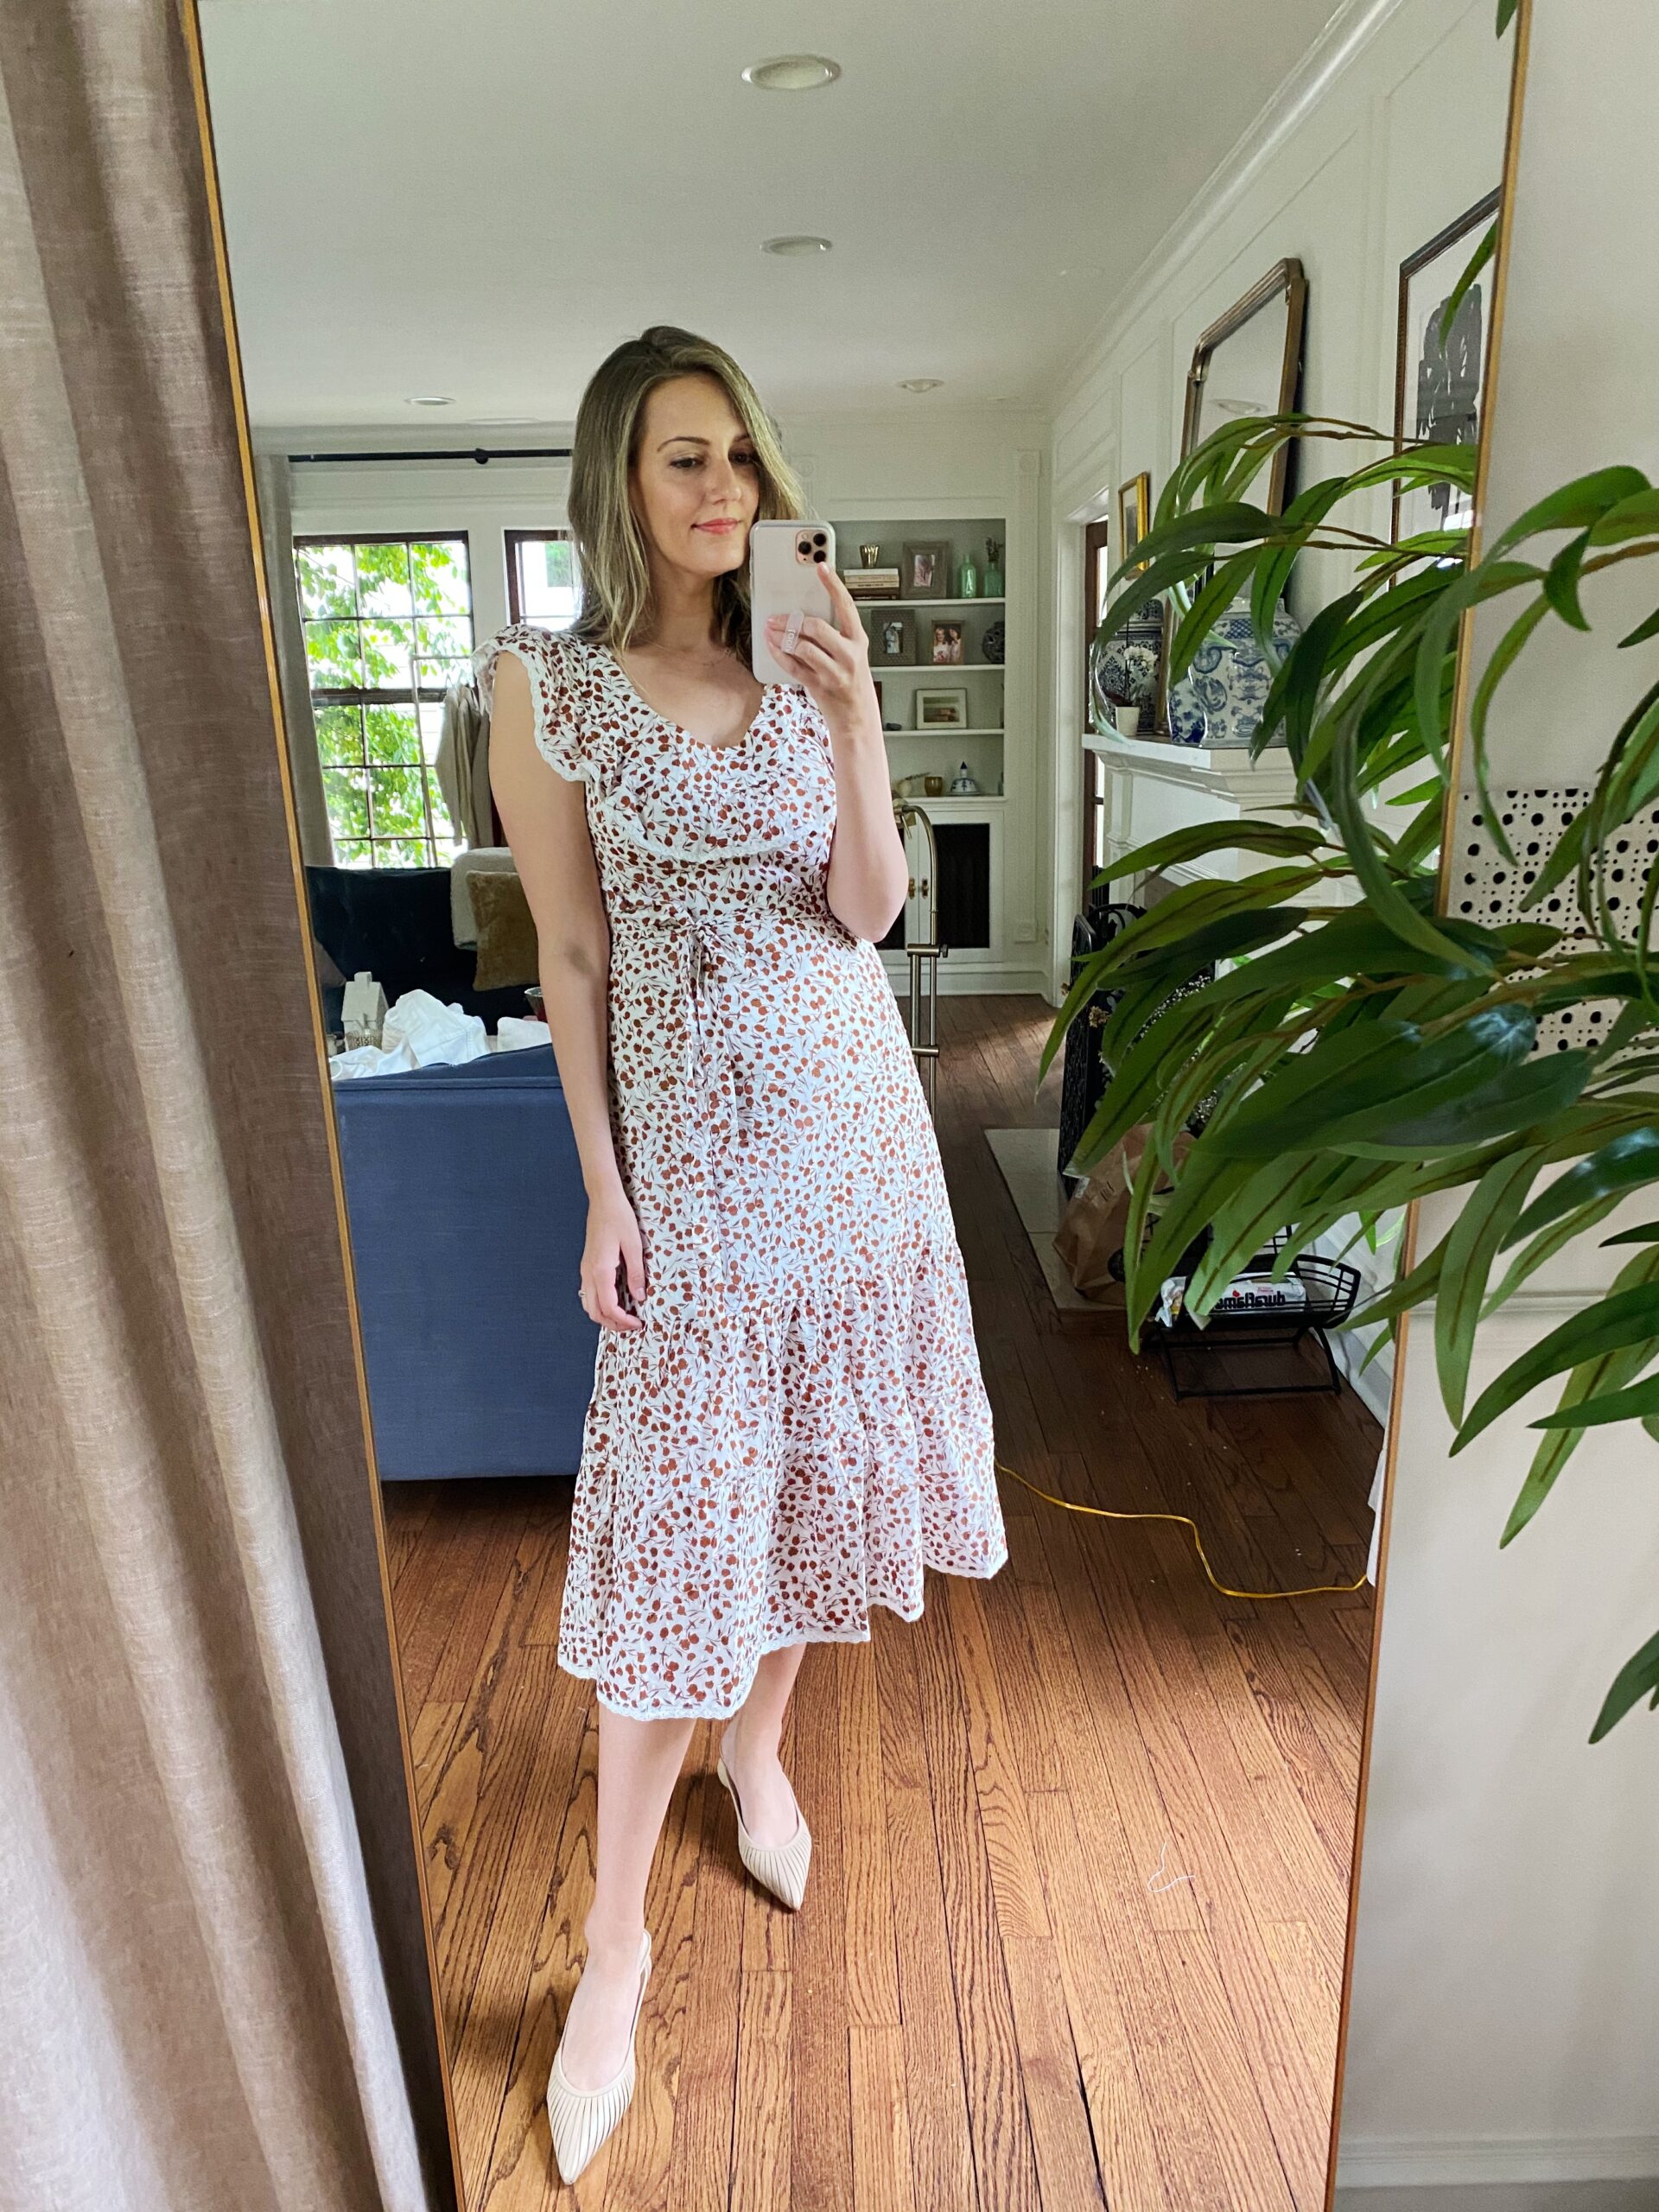 Target Rixo Dress on a woman taking a selfie in her living room 